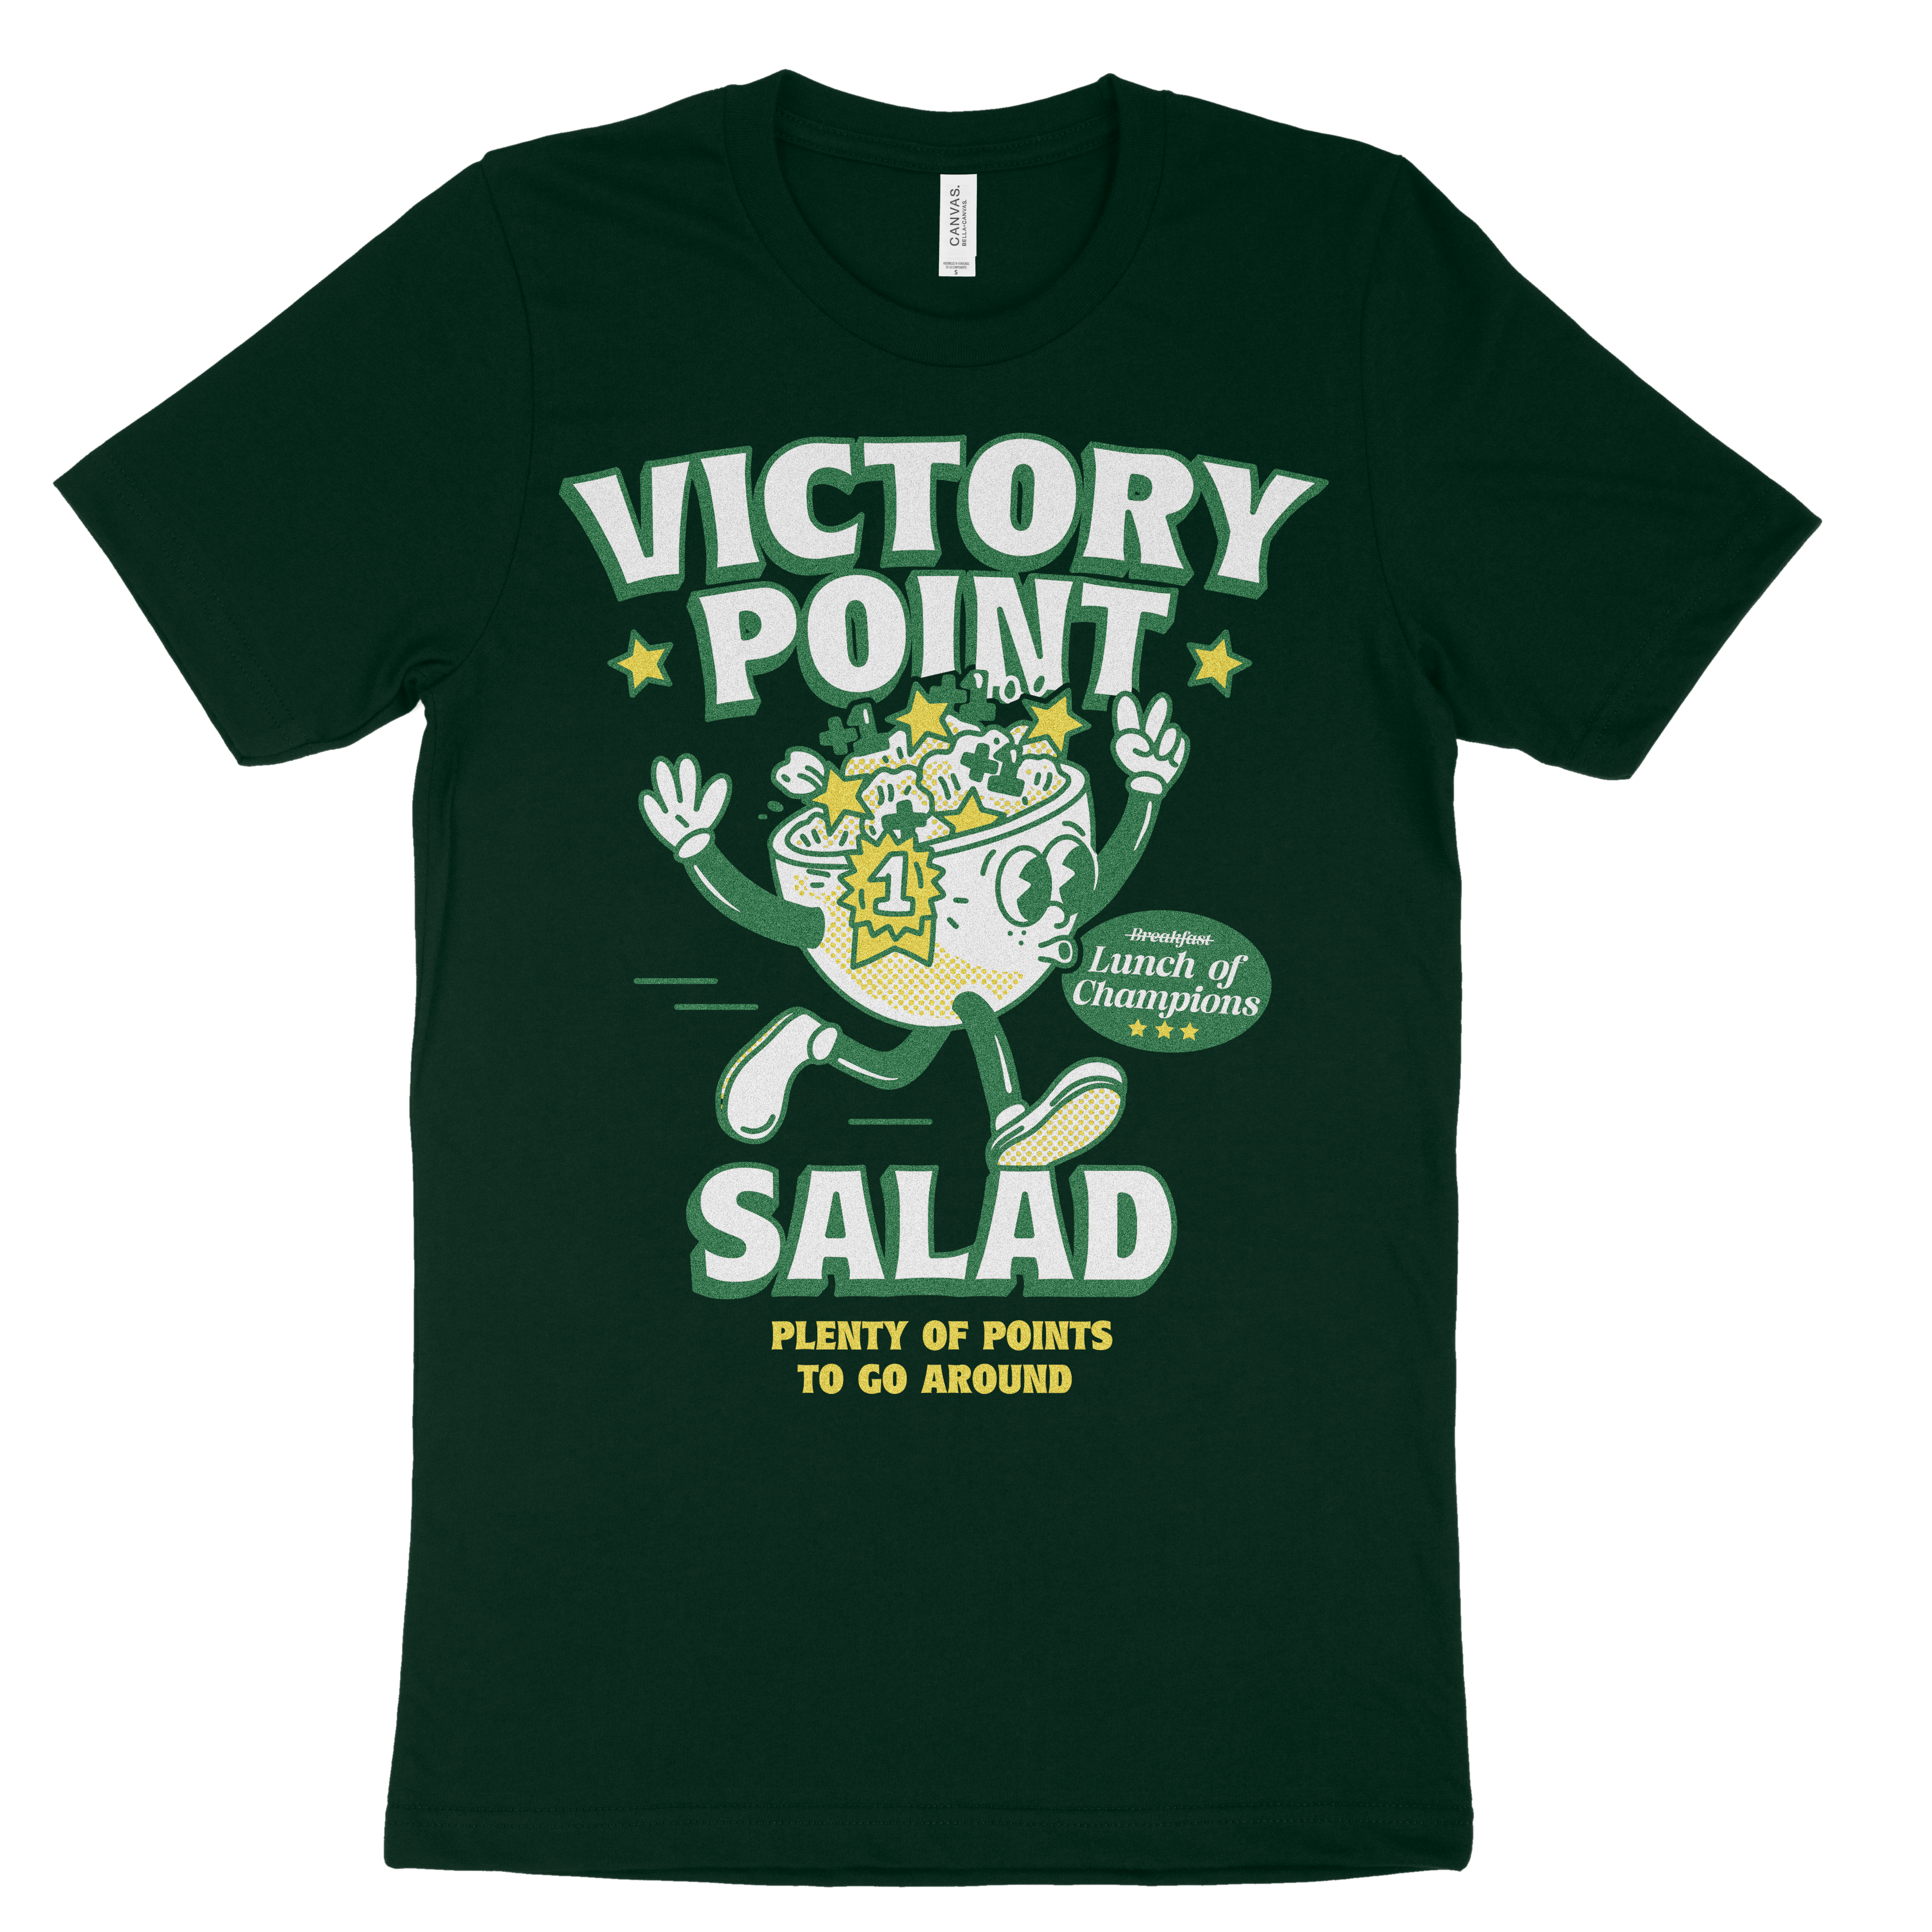 Victory Point Salad T-Shirt